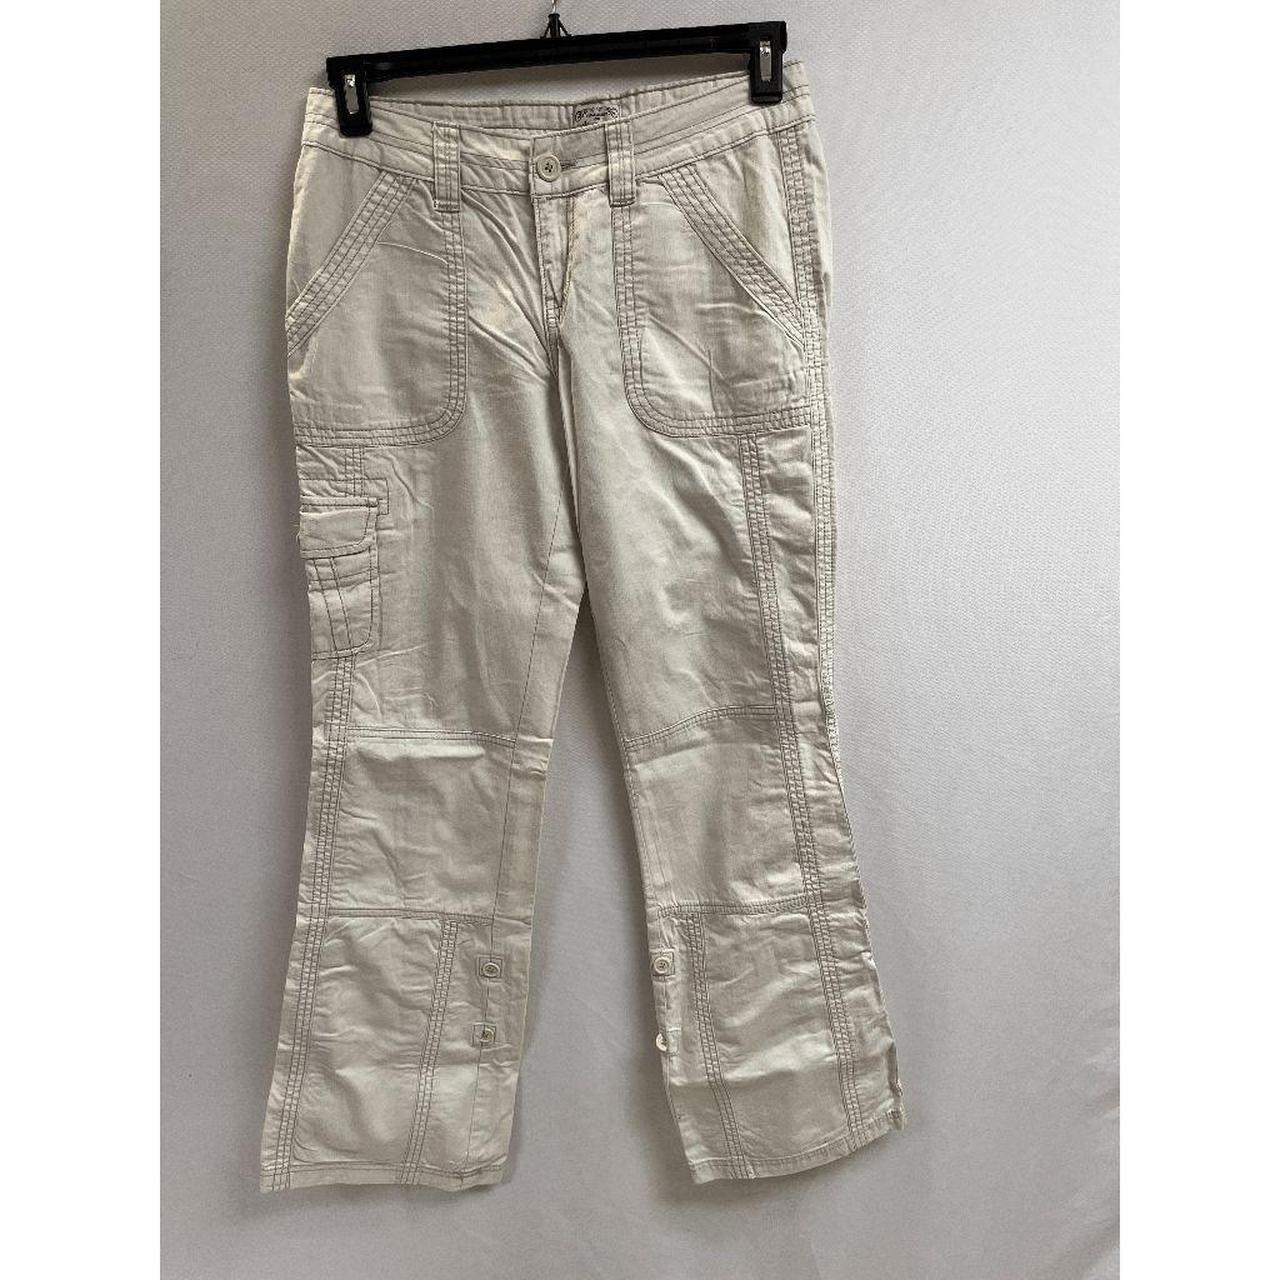 Aeropostale Women's Relaxed Fit Cargo Chino Pants